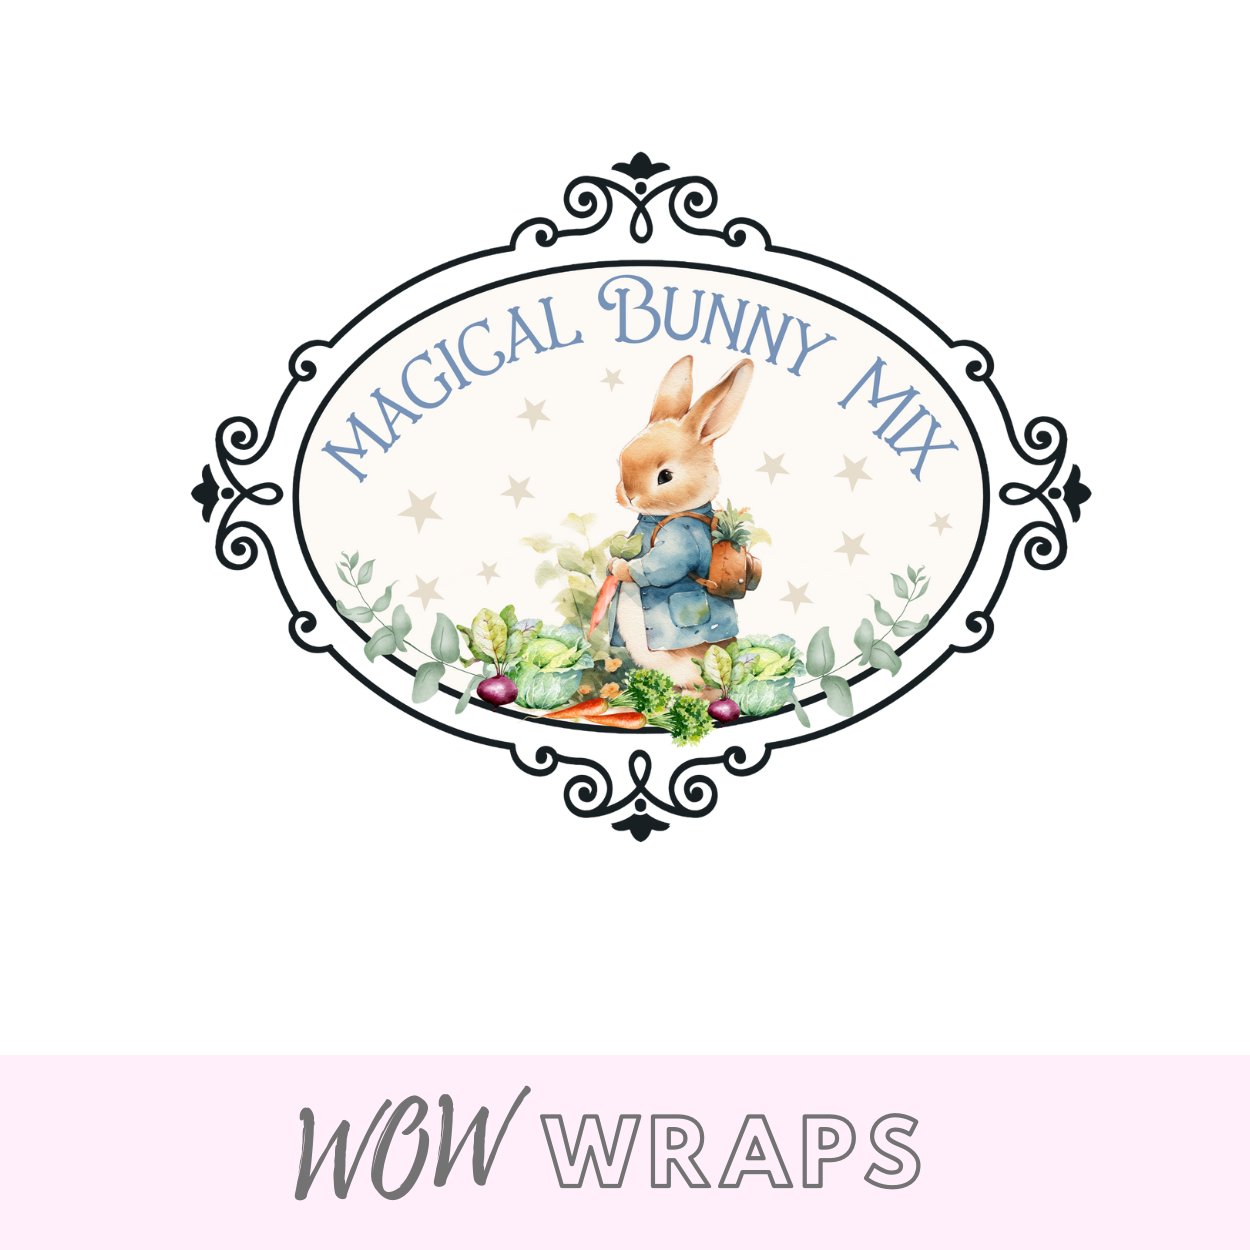 EASTER BUNNY FOOD - MAGICAL BUNNY MIX -UV-DTF POPPER DECAL - Wow Wraps